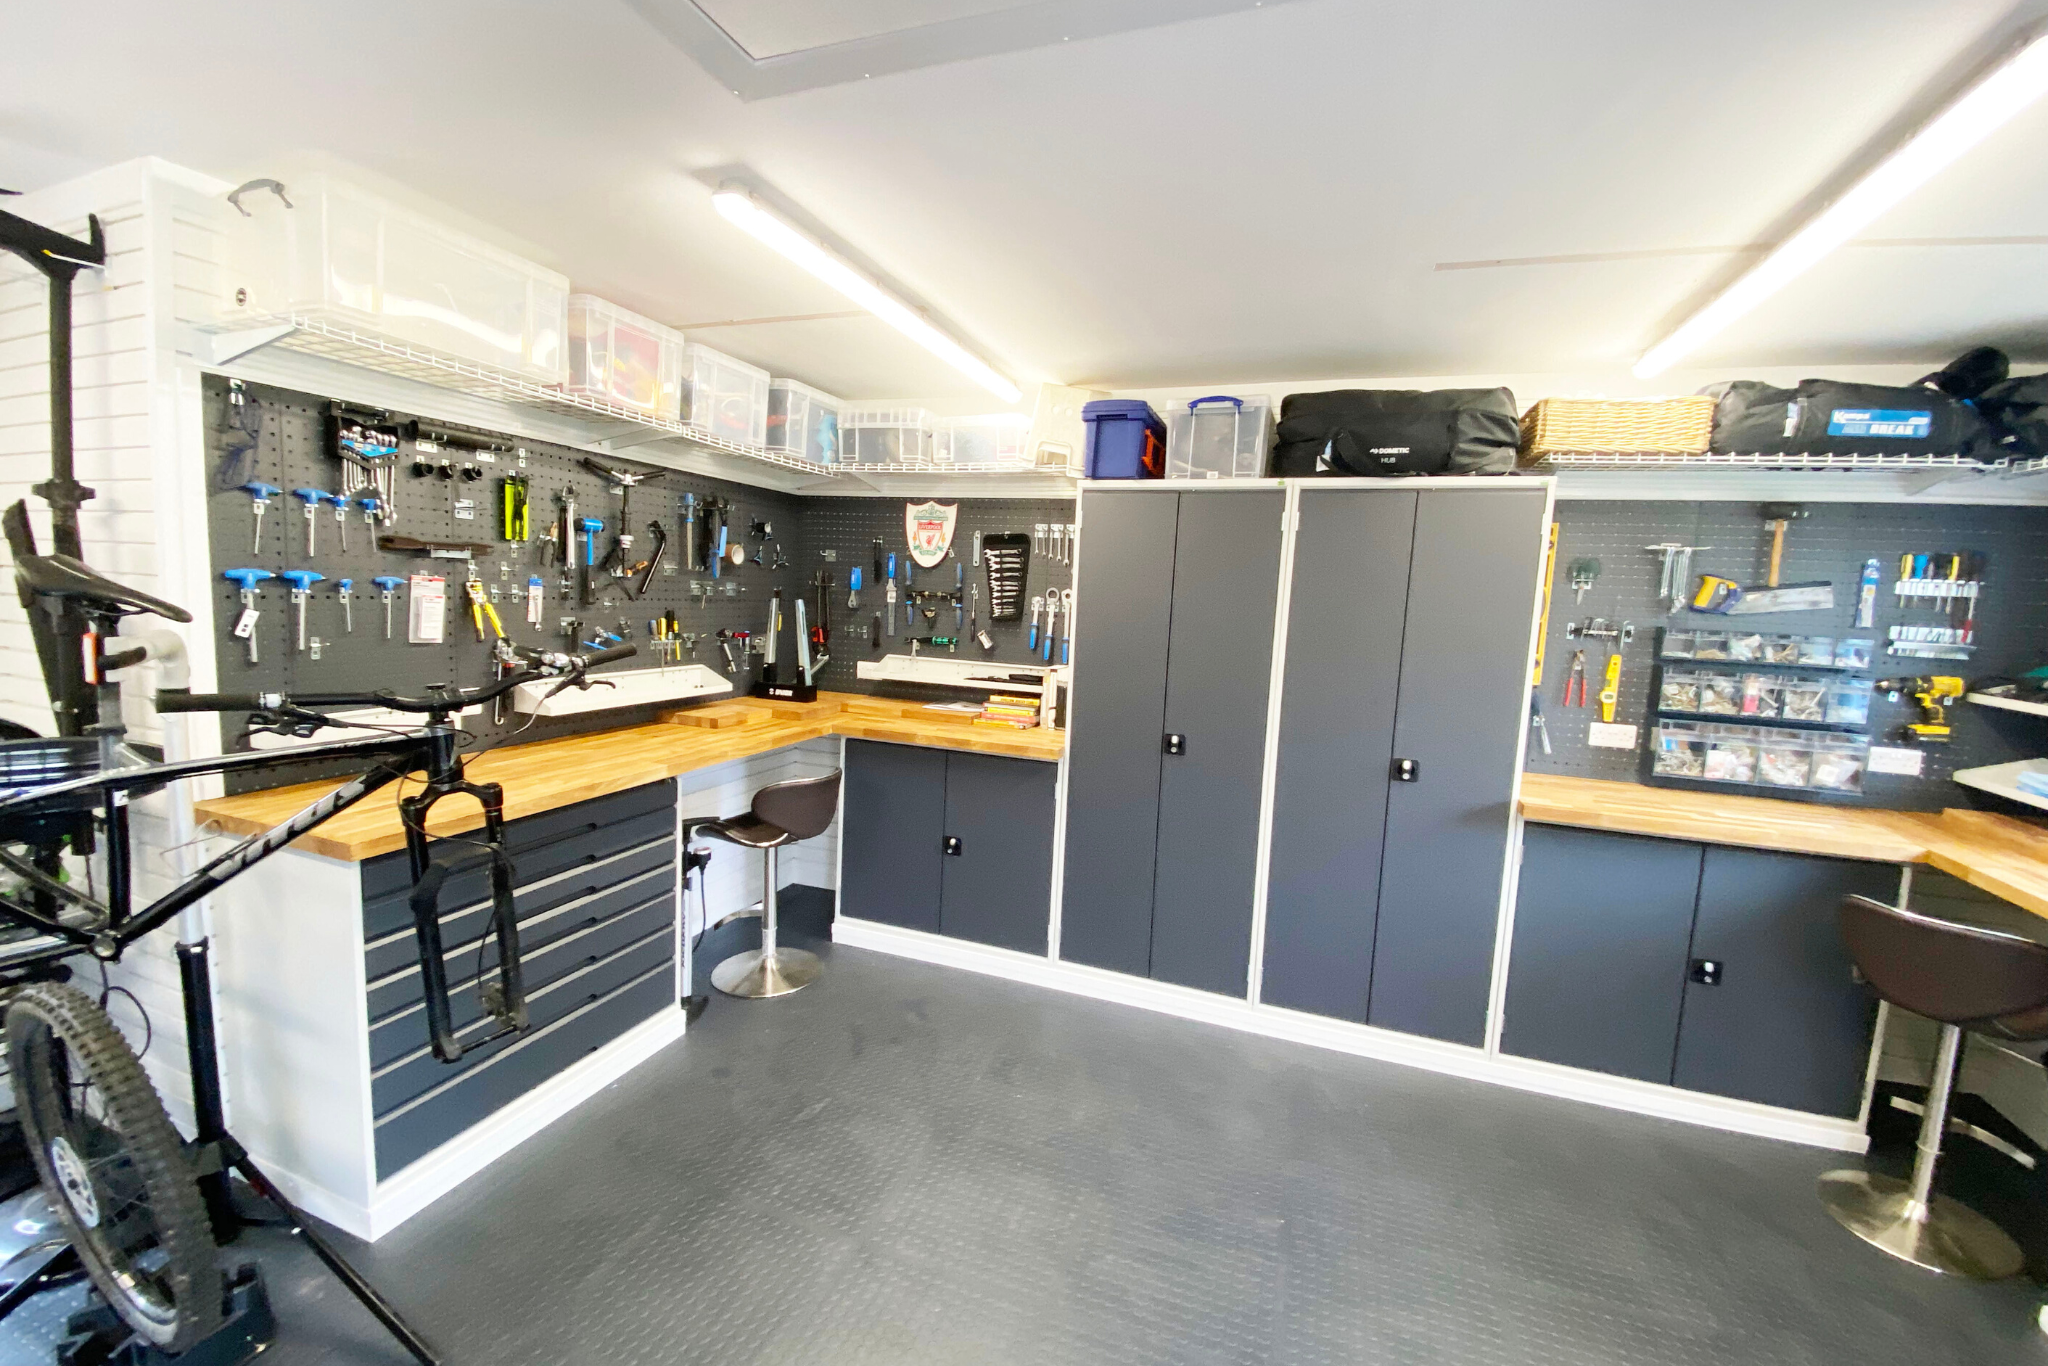 What's your passion? Allow Garageflex to help you make the most of your garage space.